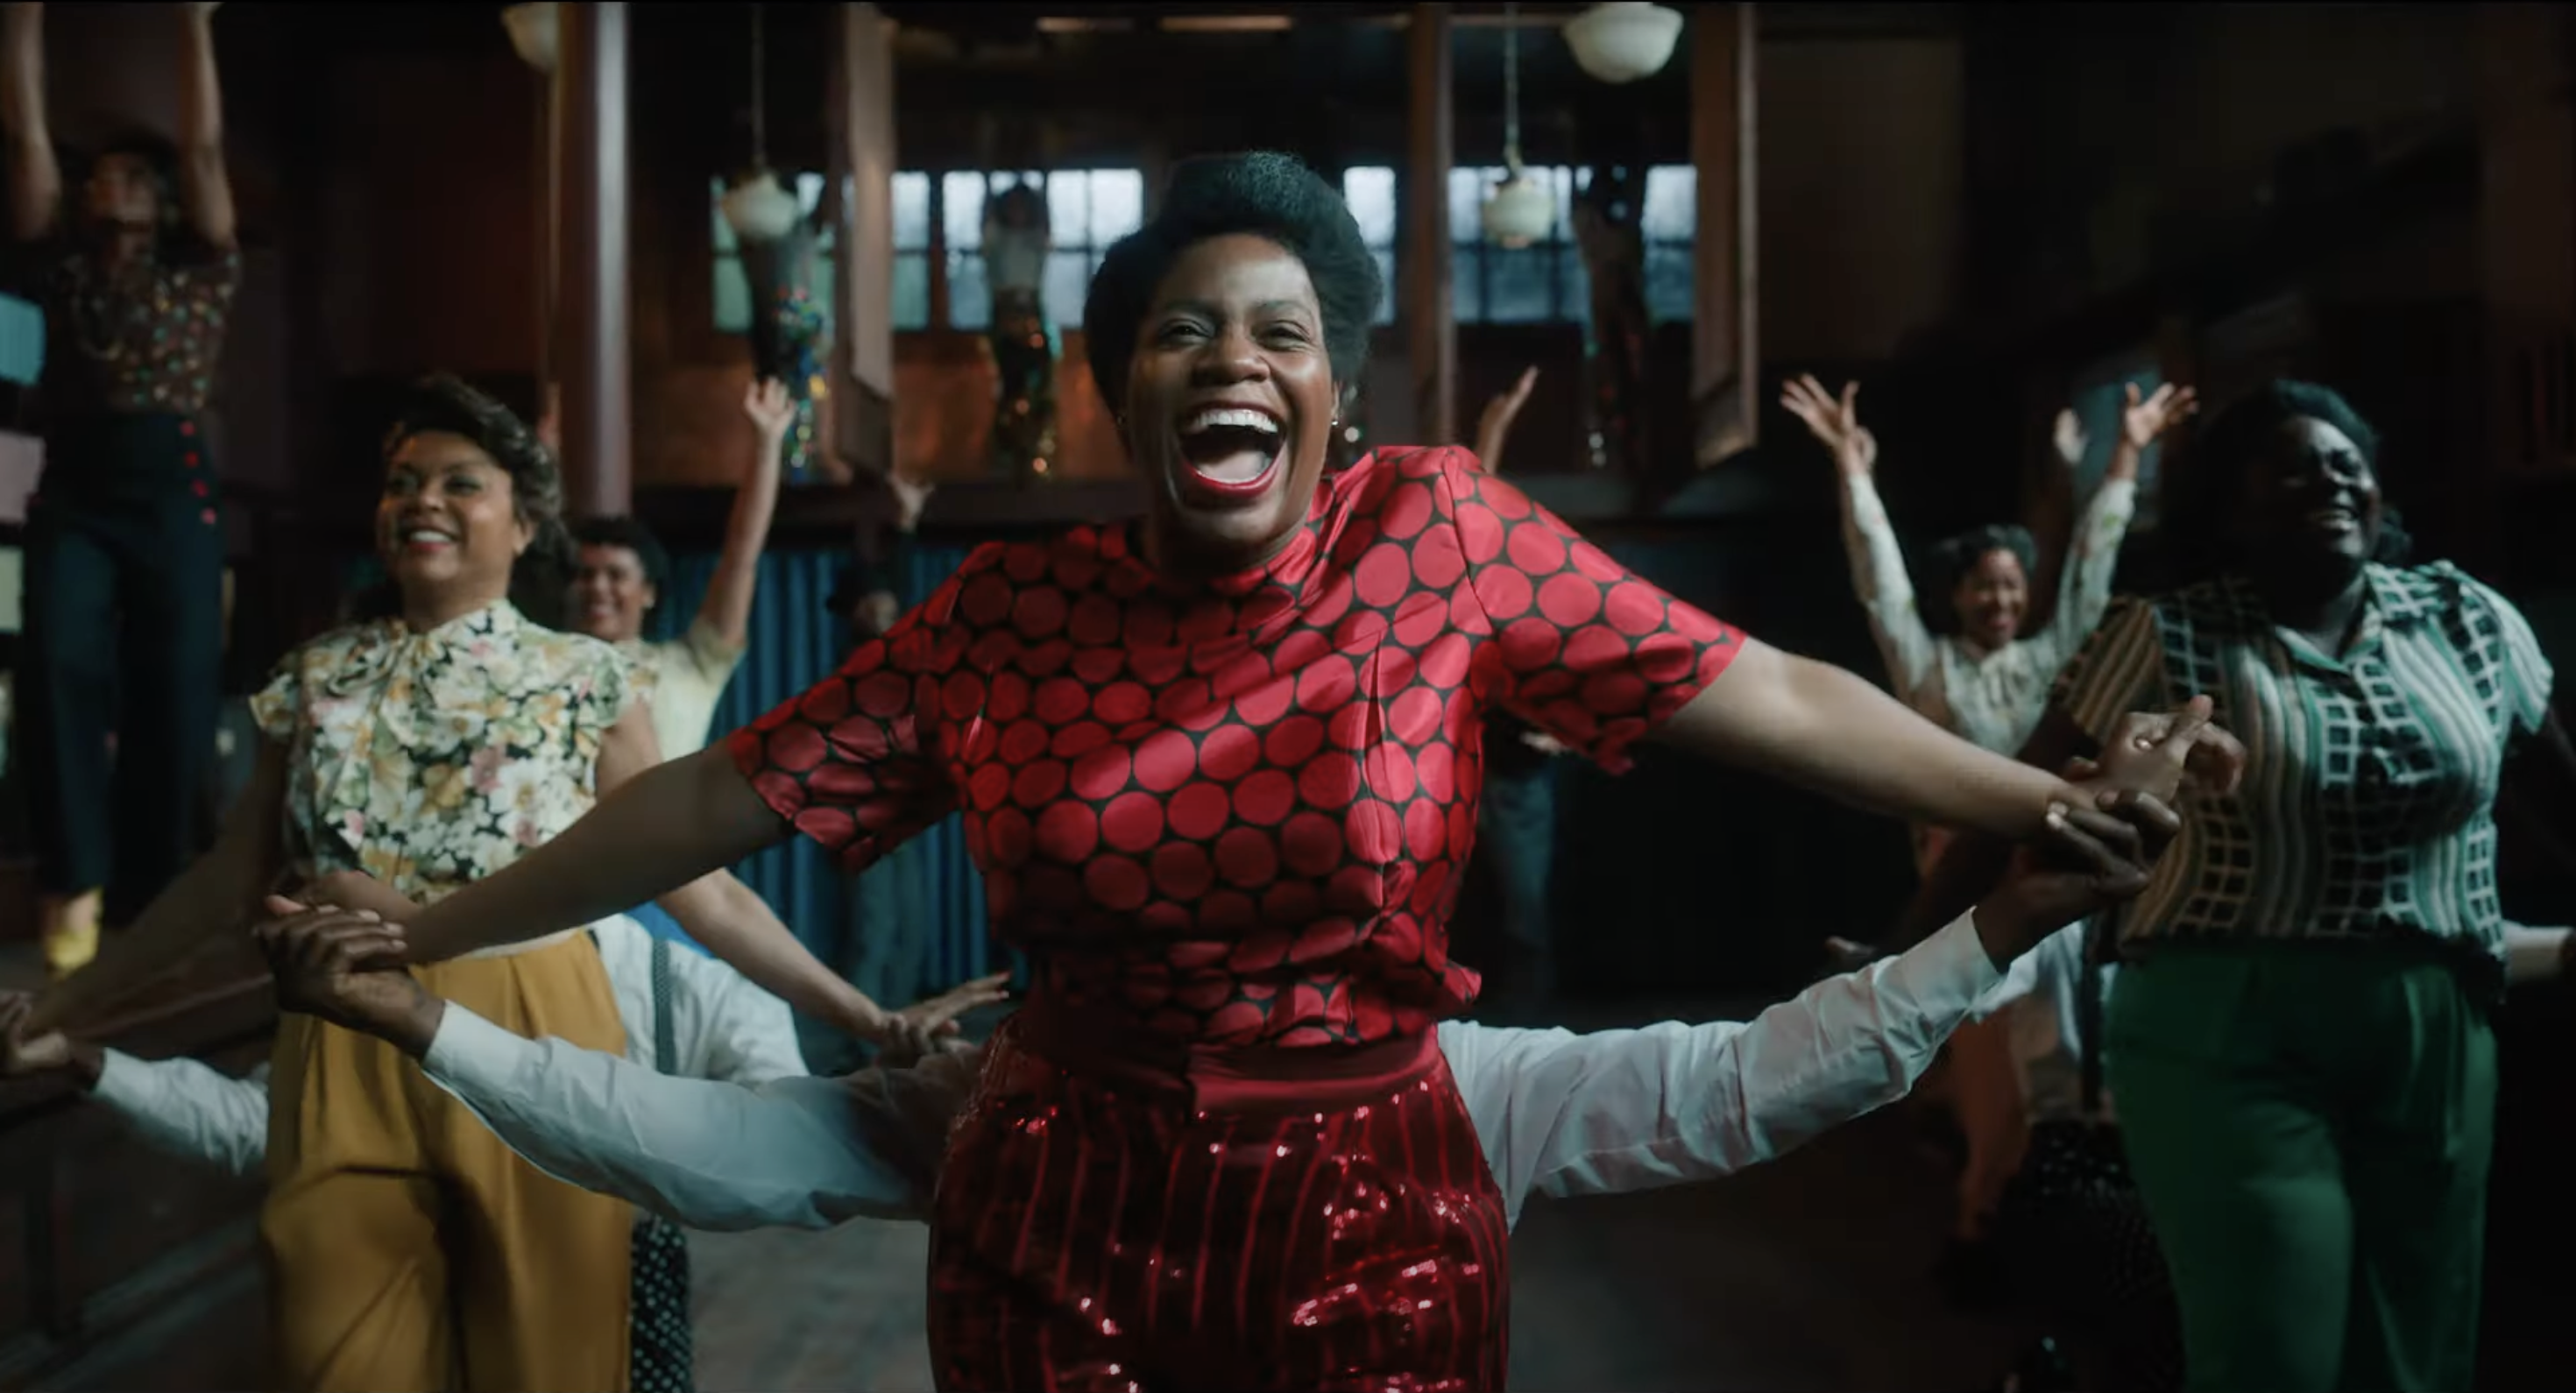 fantasia singing in a scene from the film